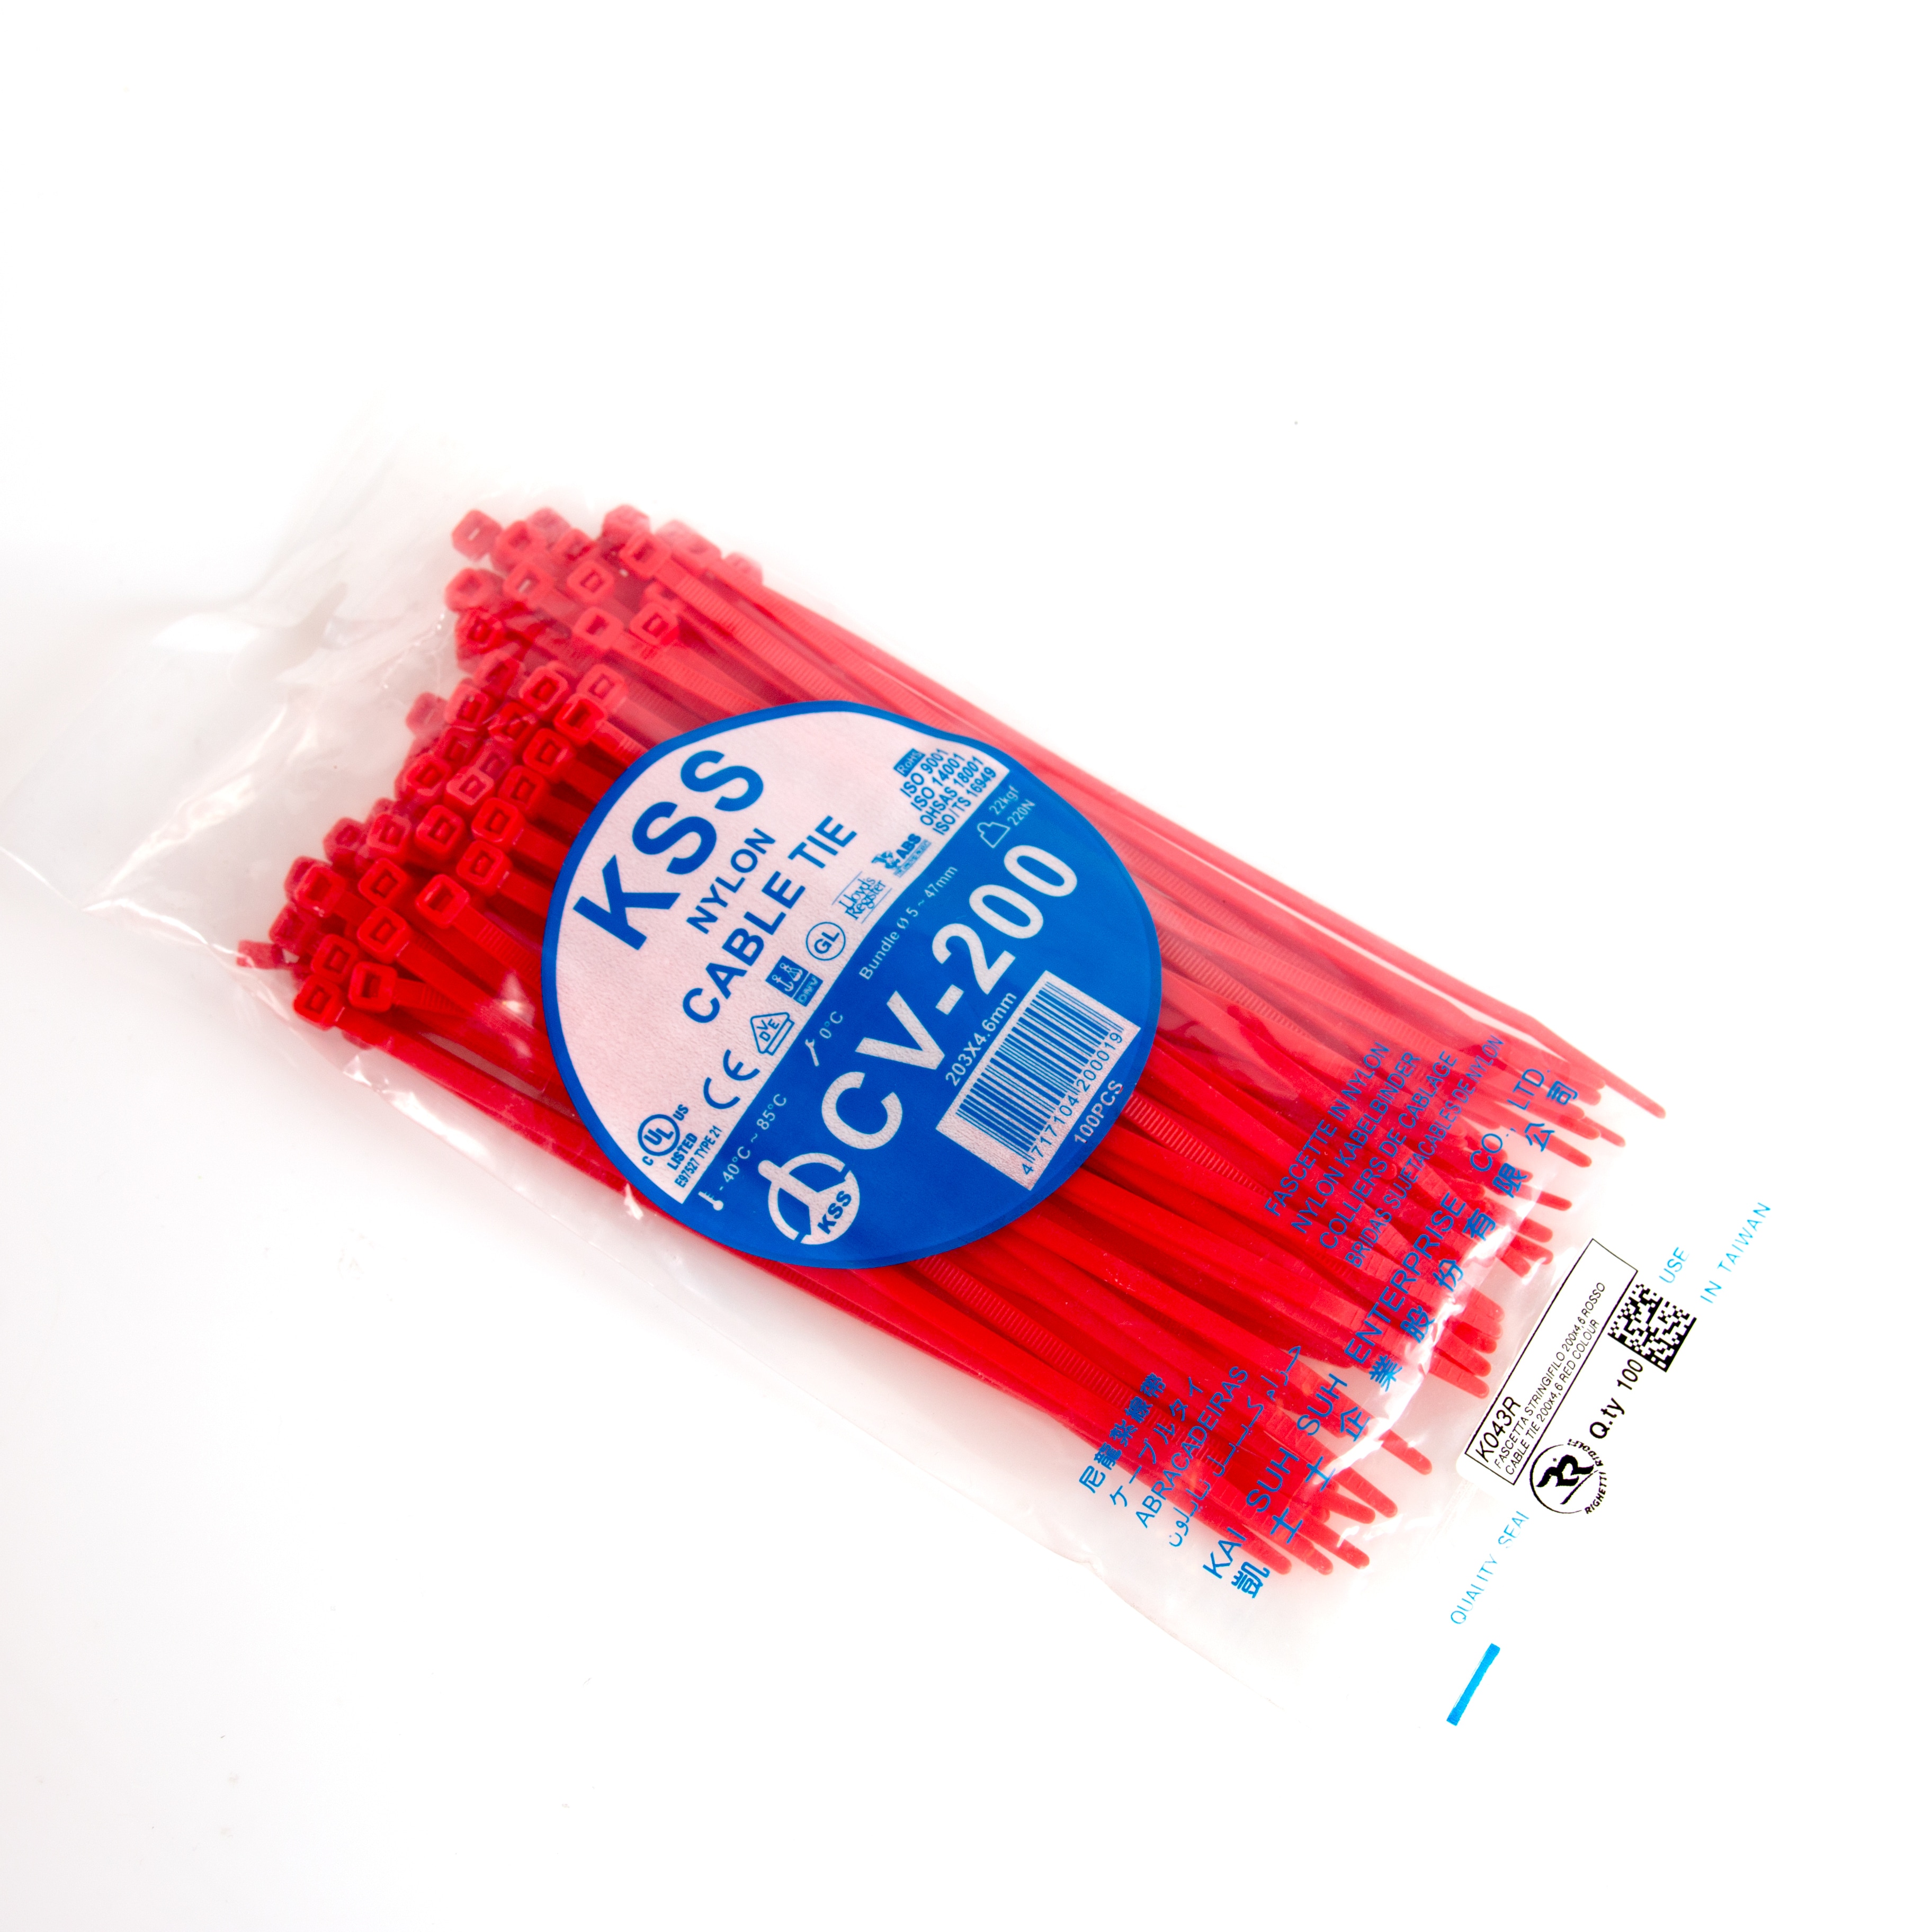 Cable Ties 200x4,8 100 pc Red